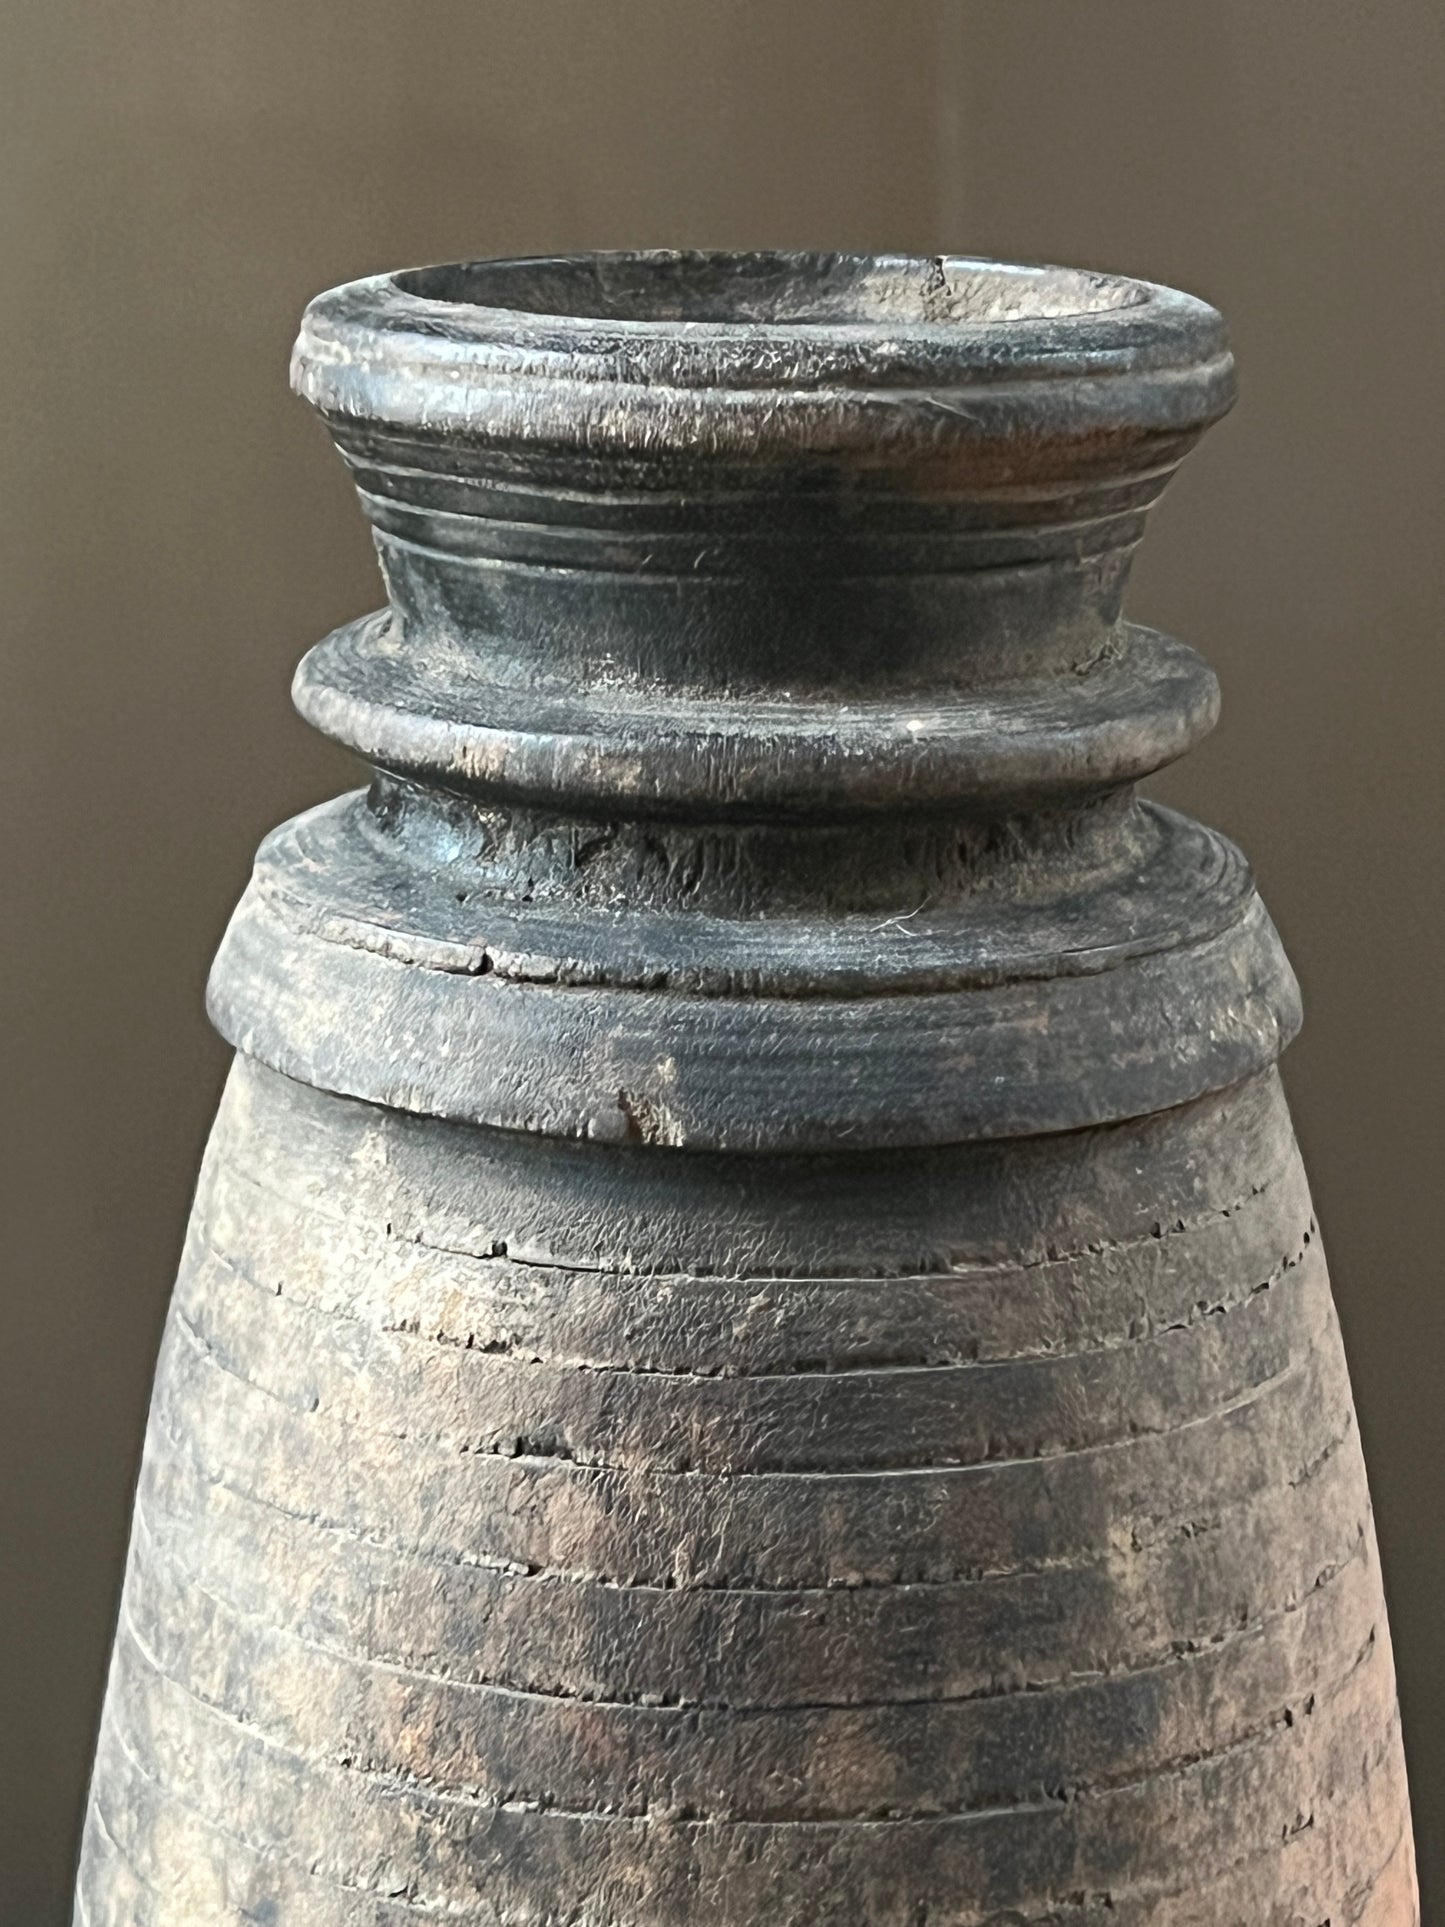 Oude Nepalese pot